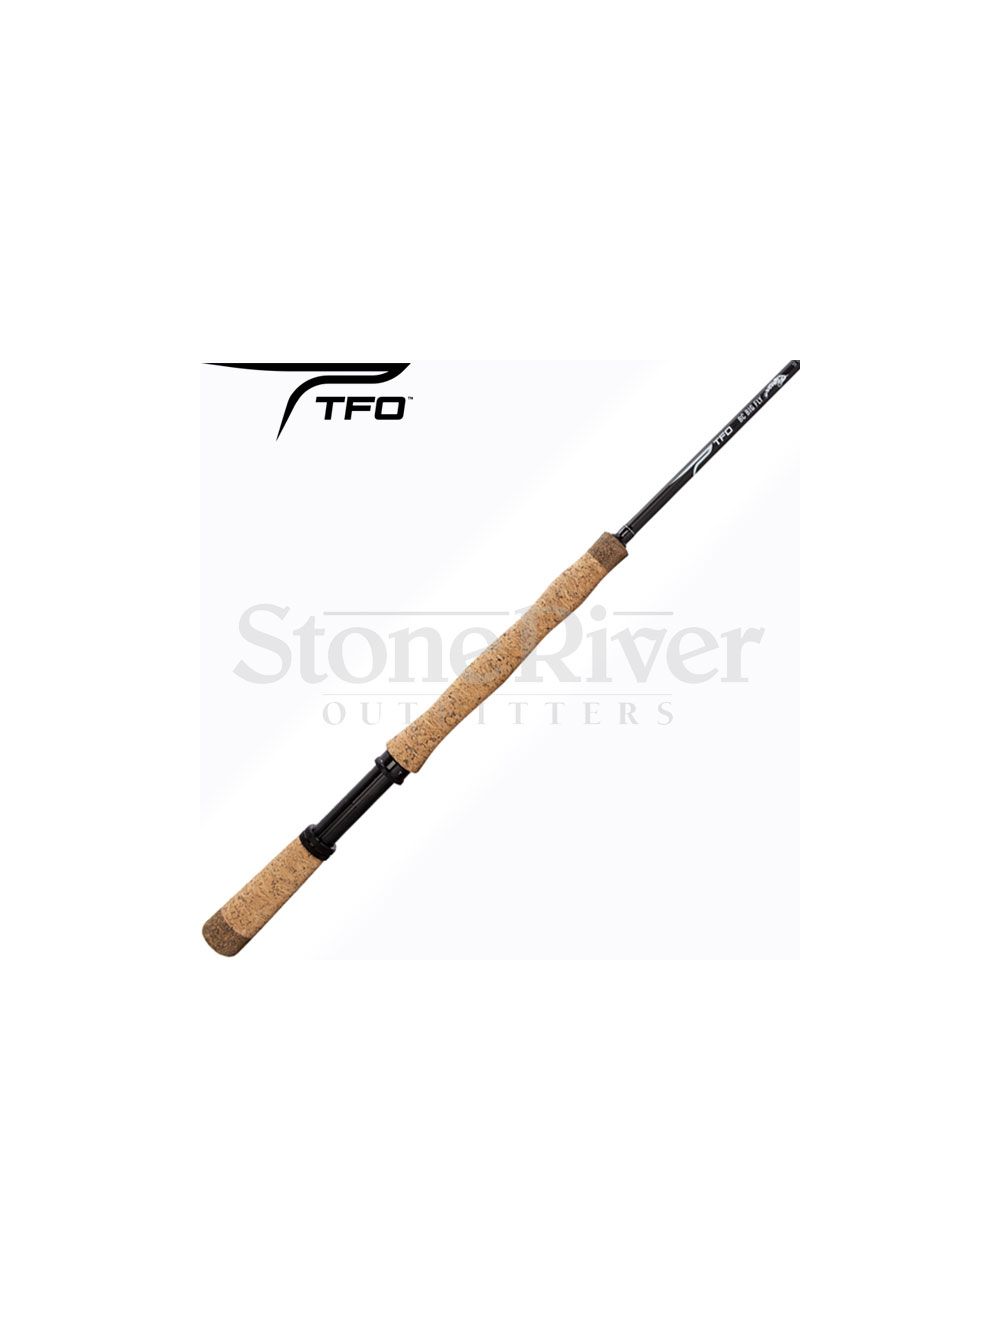 TFO Rods - Temple Fork Outfitters (@templeforkoutfitters